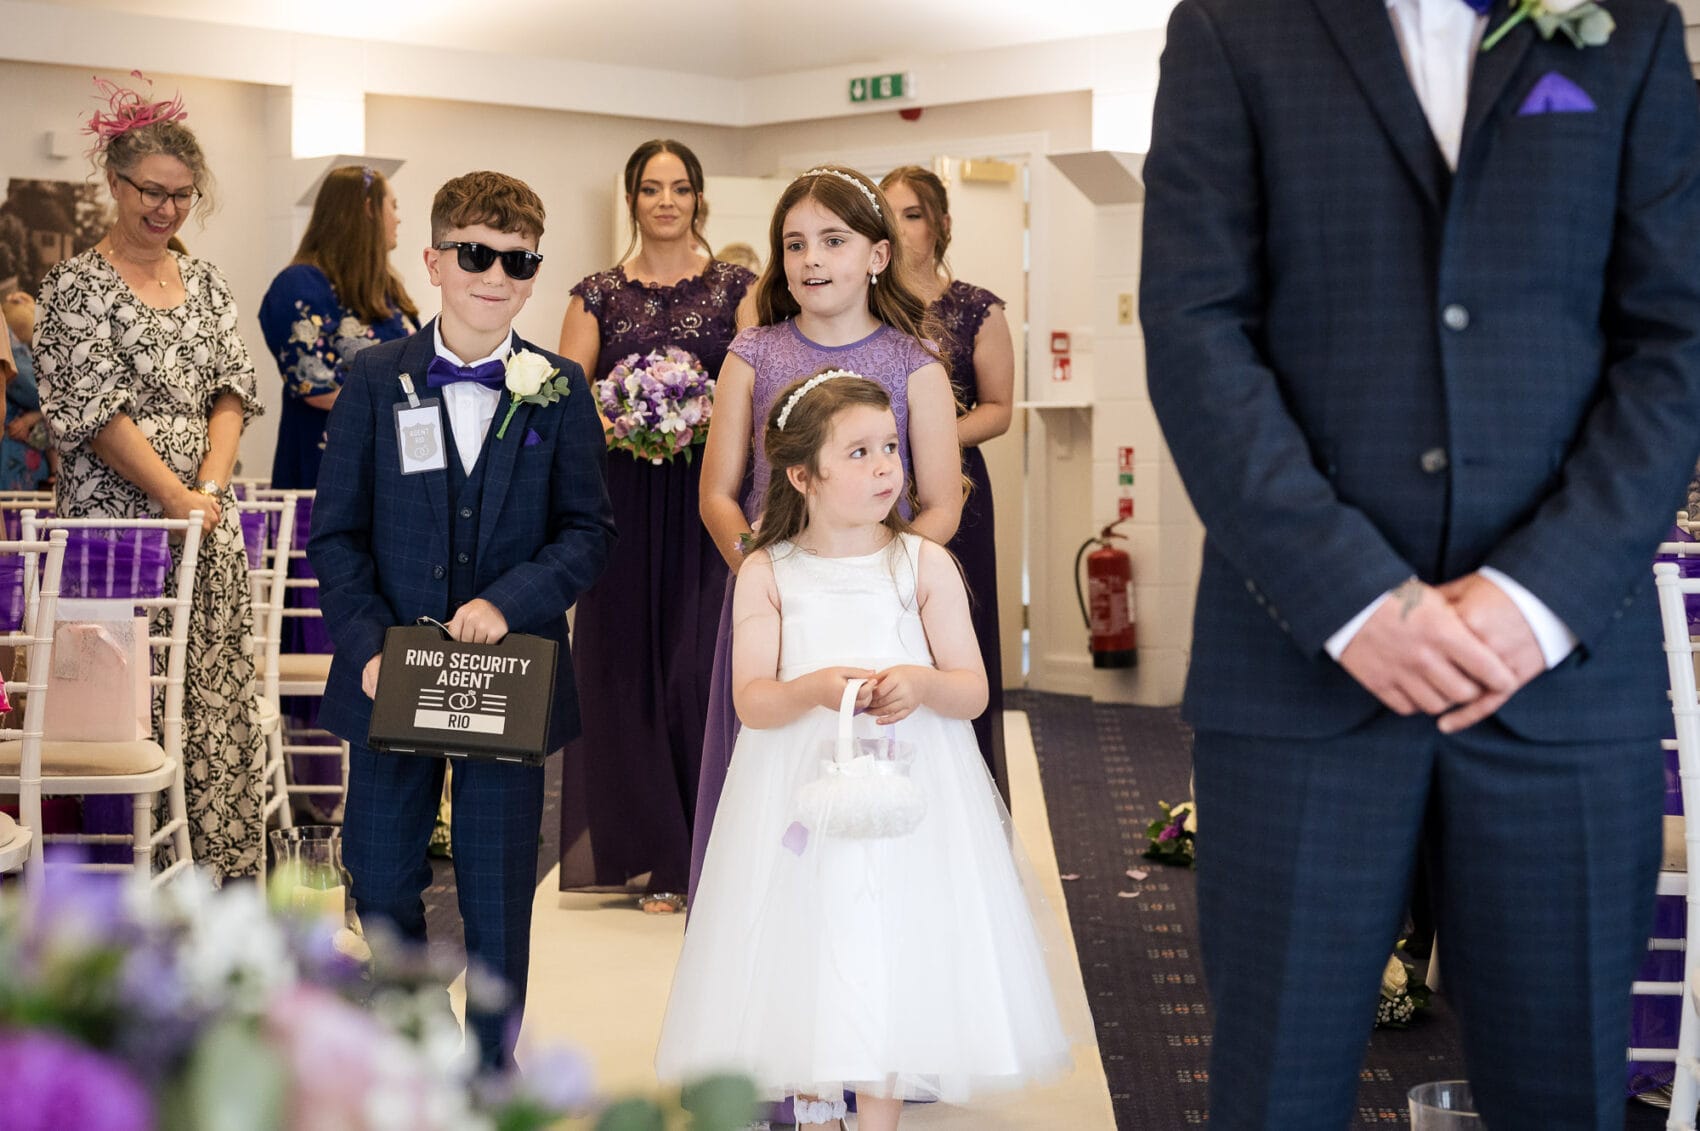 Flowergirl Ring security walk the aisle